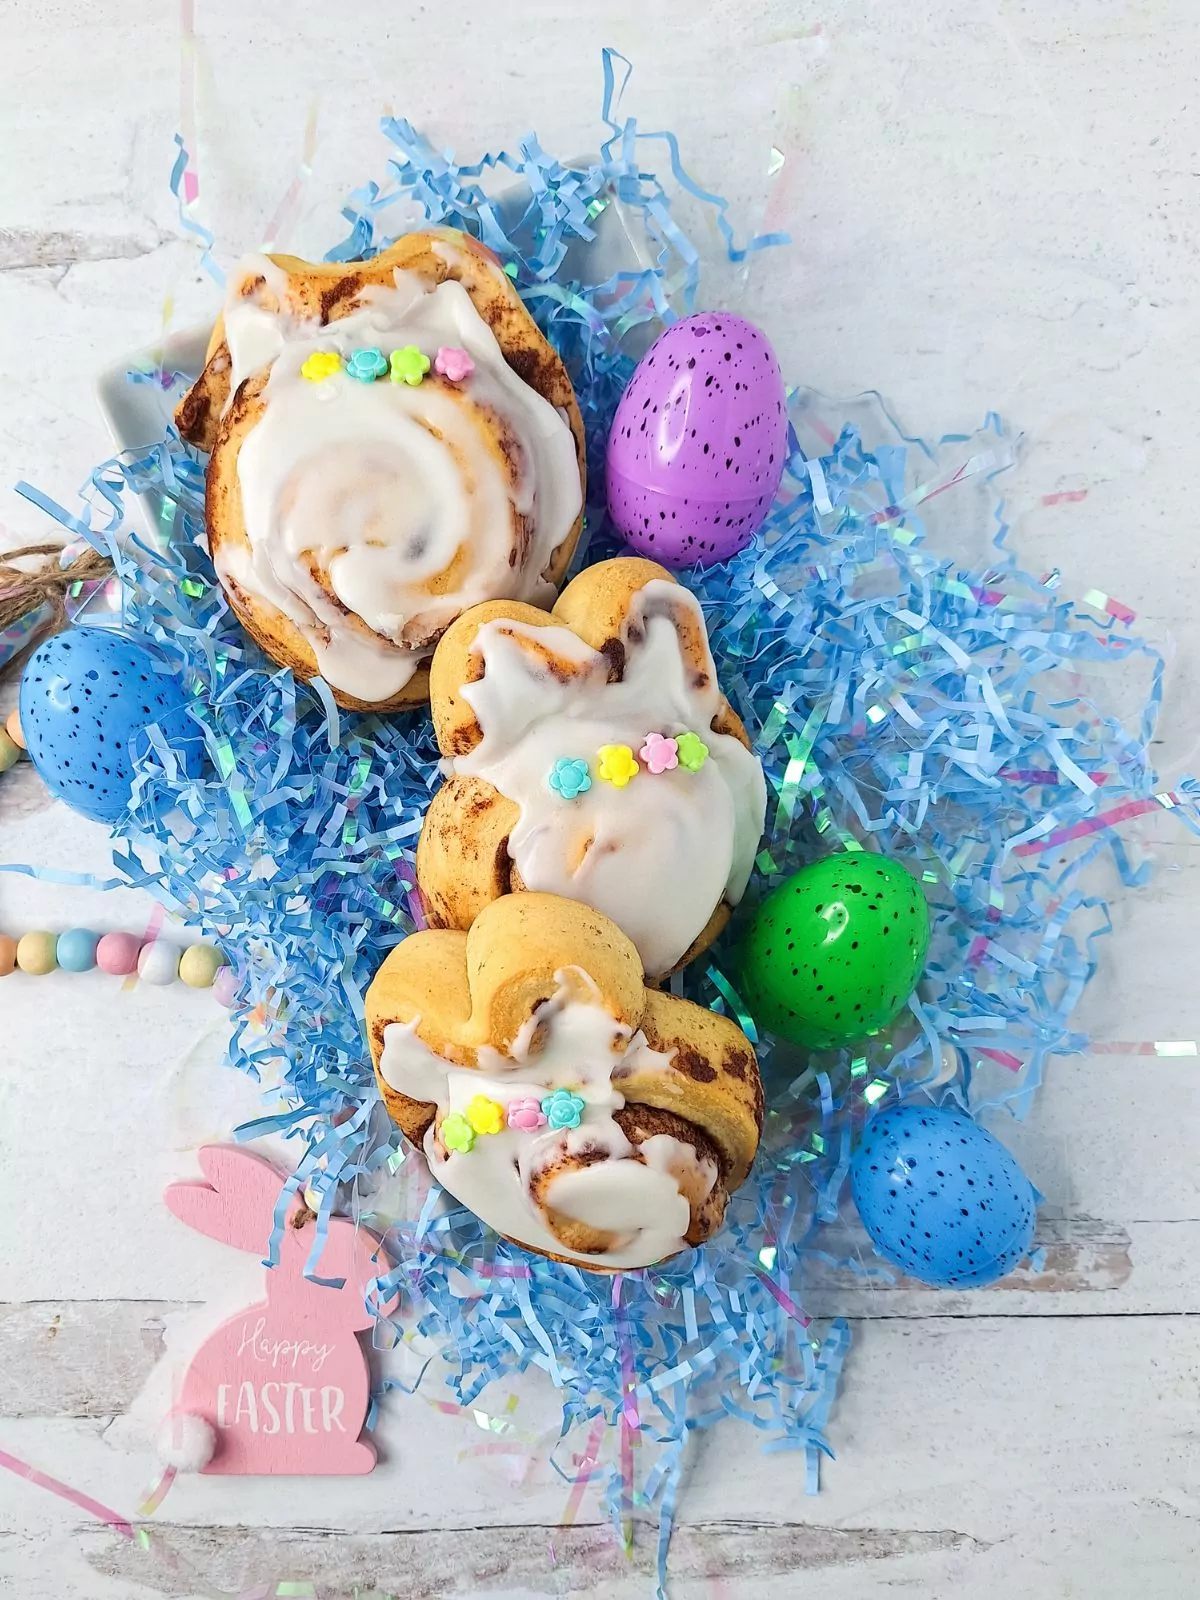 decorated cinnamon rolls with frosting and flower shaped sprinkles.